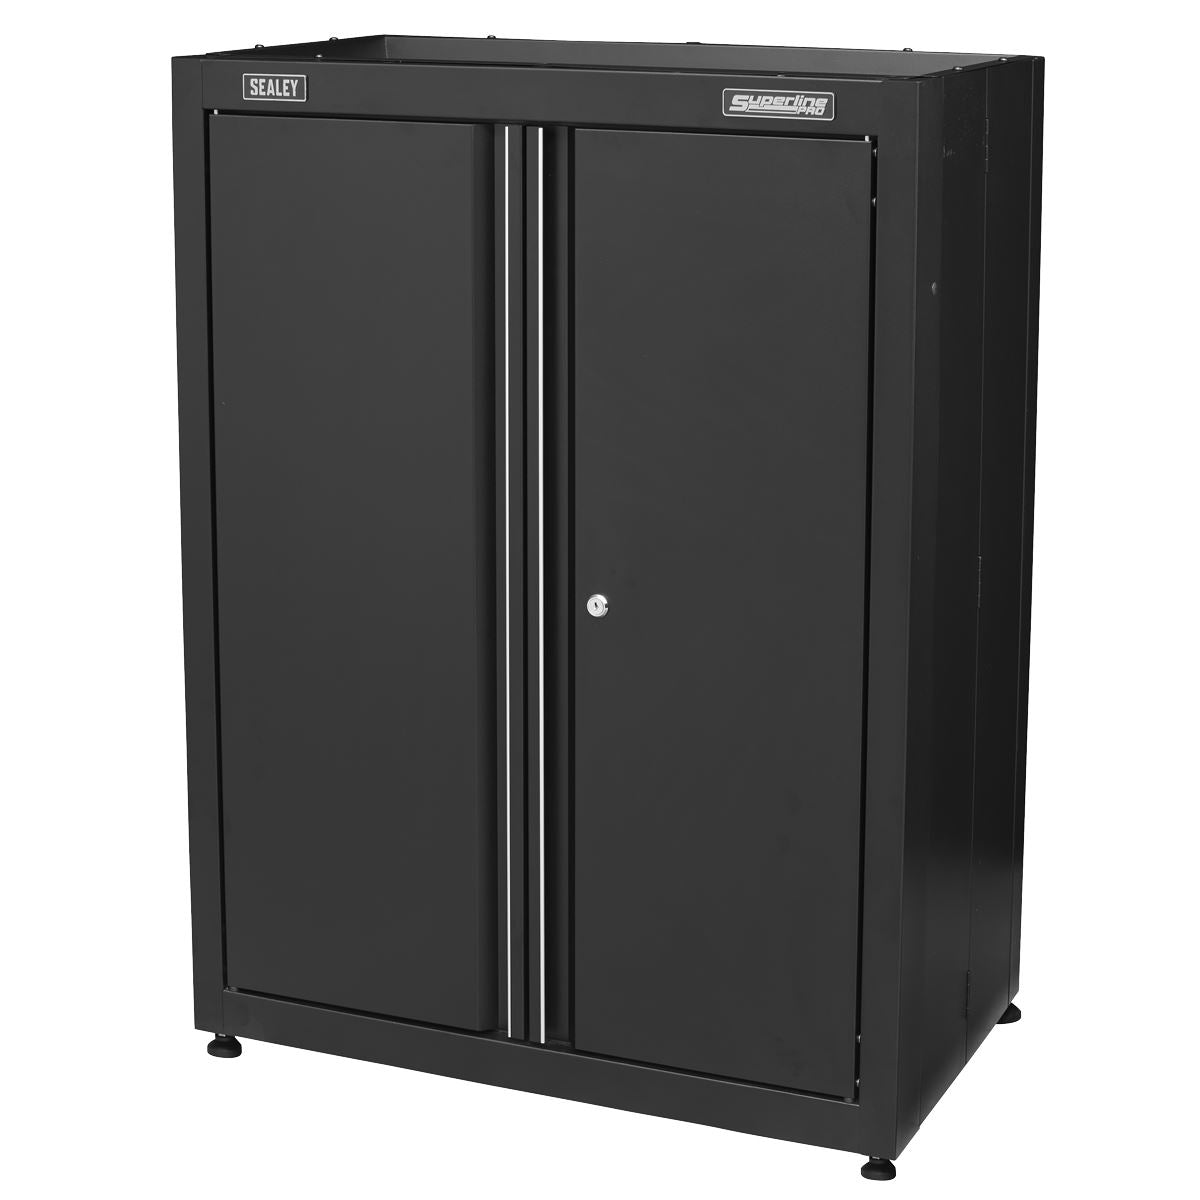 Sealey Superline Pro Rapid-Fit Dual Stacking Cabinets